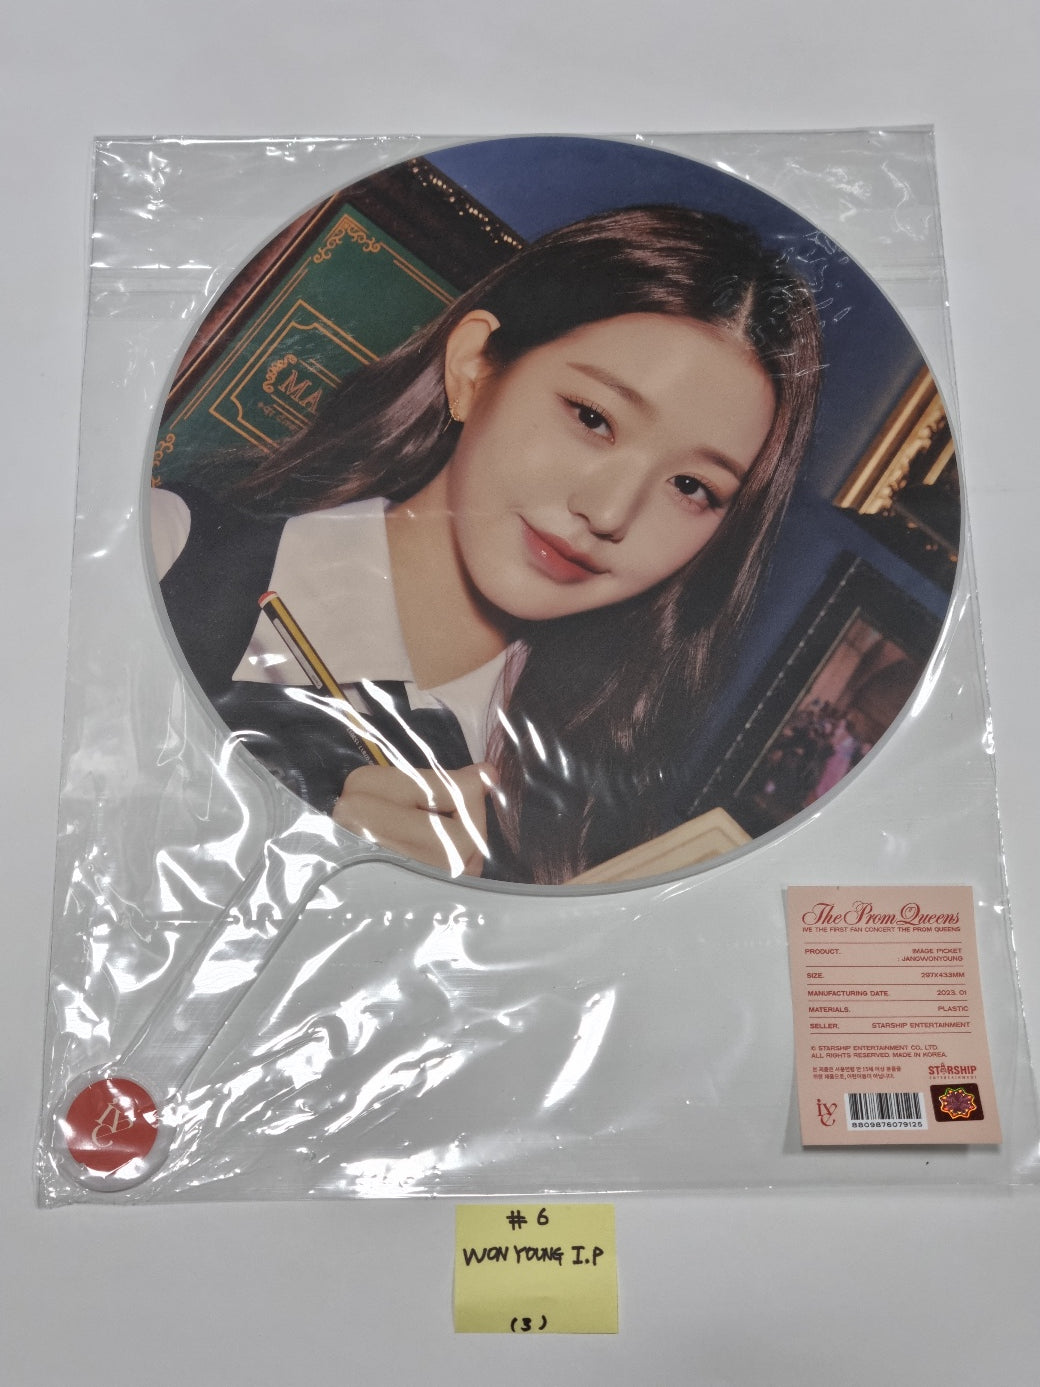 IVE "The Prom Queens" 1st Fan-Concert - Official MD [응원봉,포토 슬로건, 이미지 피켓]